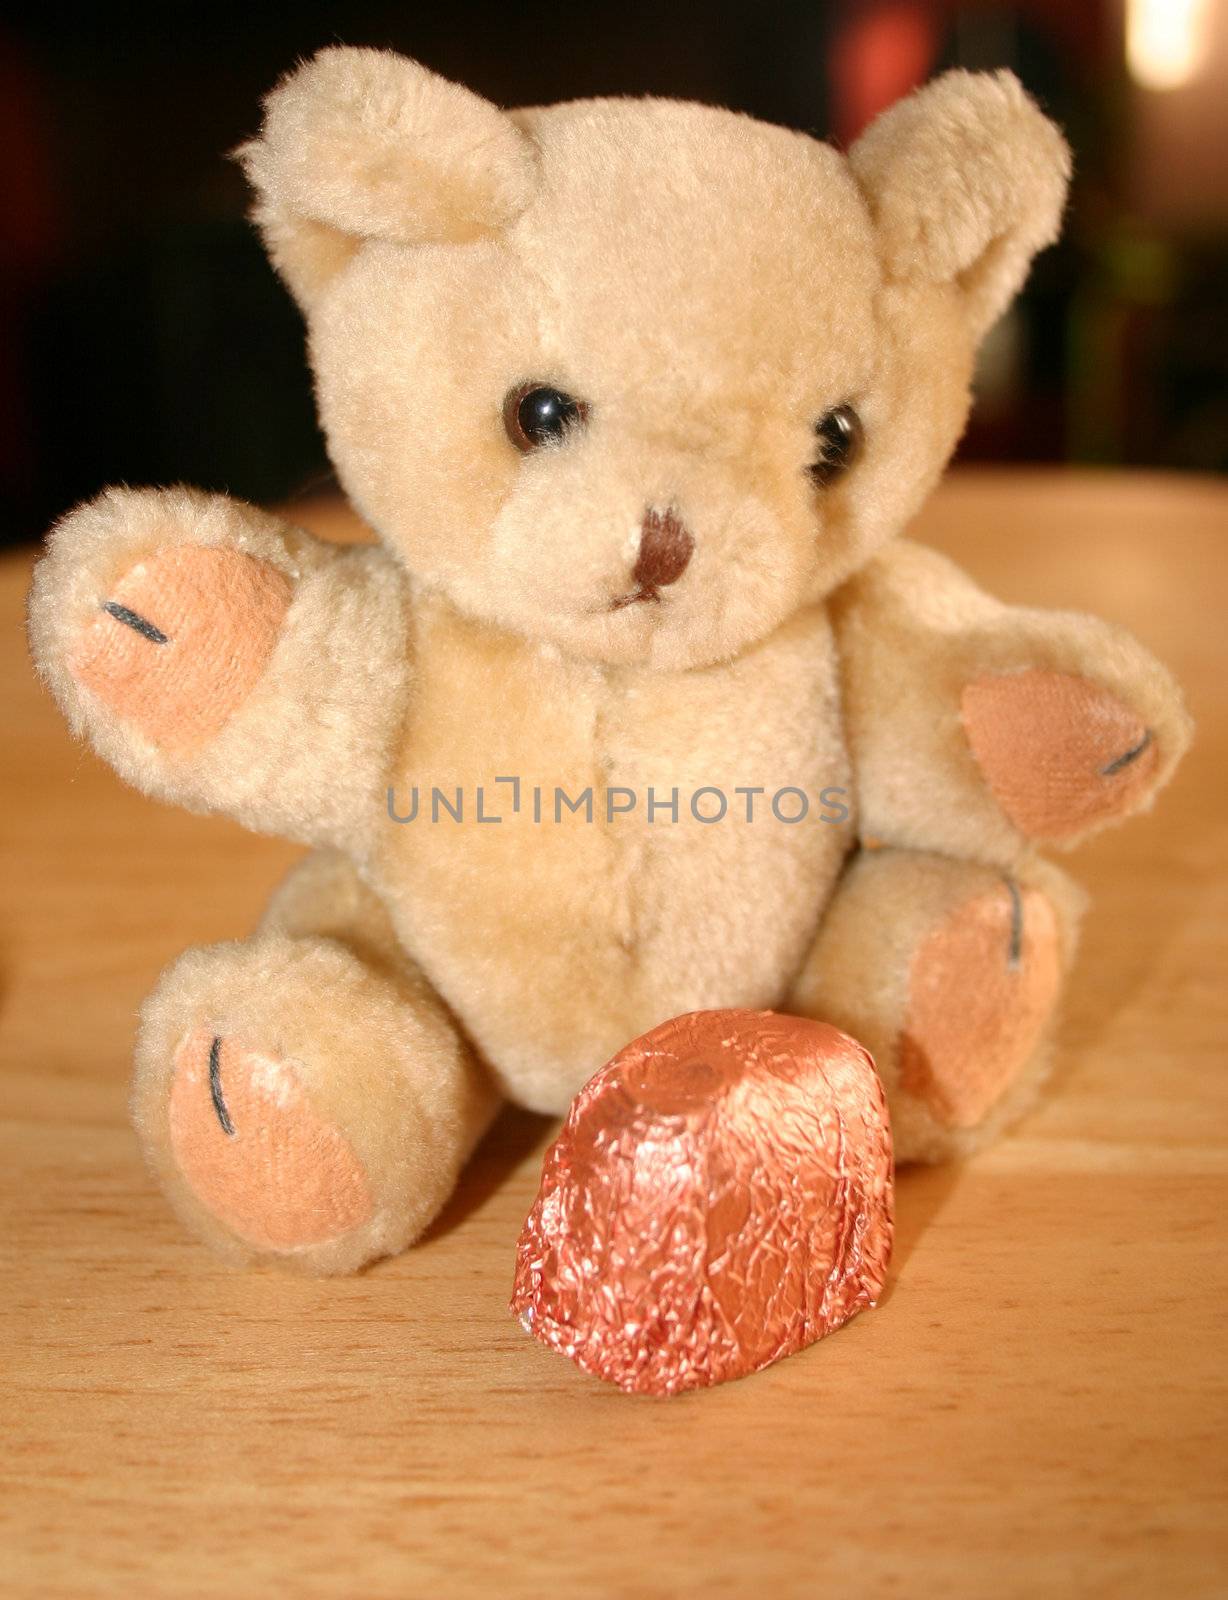 teddy has a favourite chocolate wrapped in foil